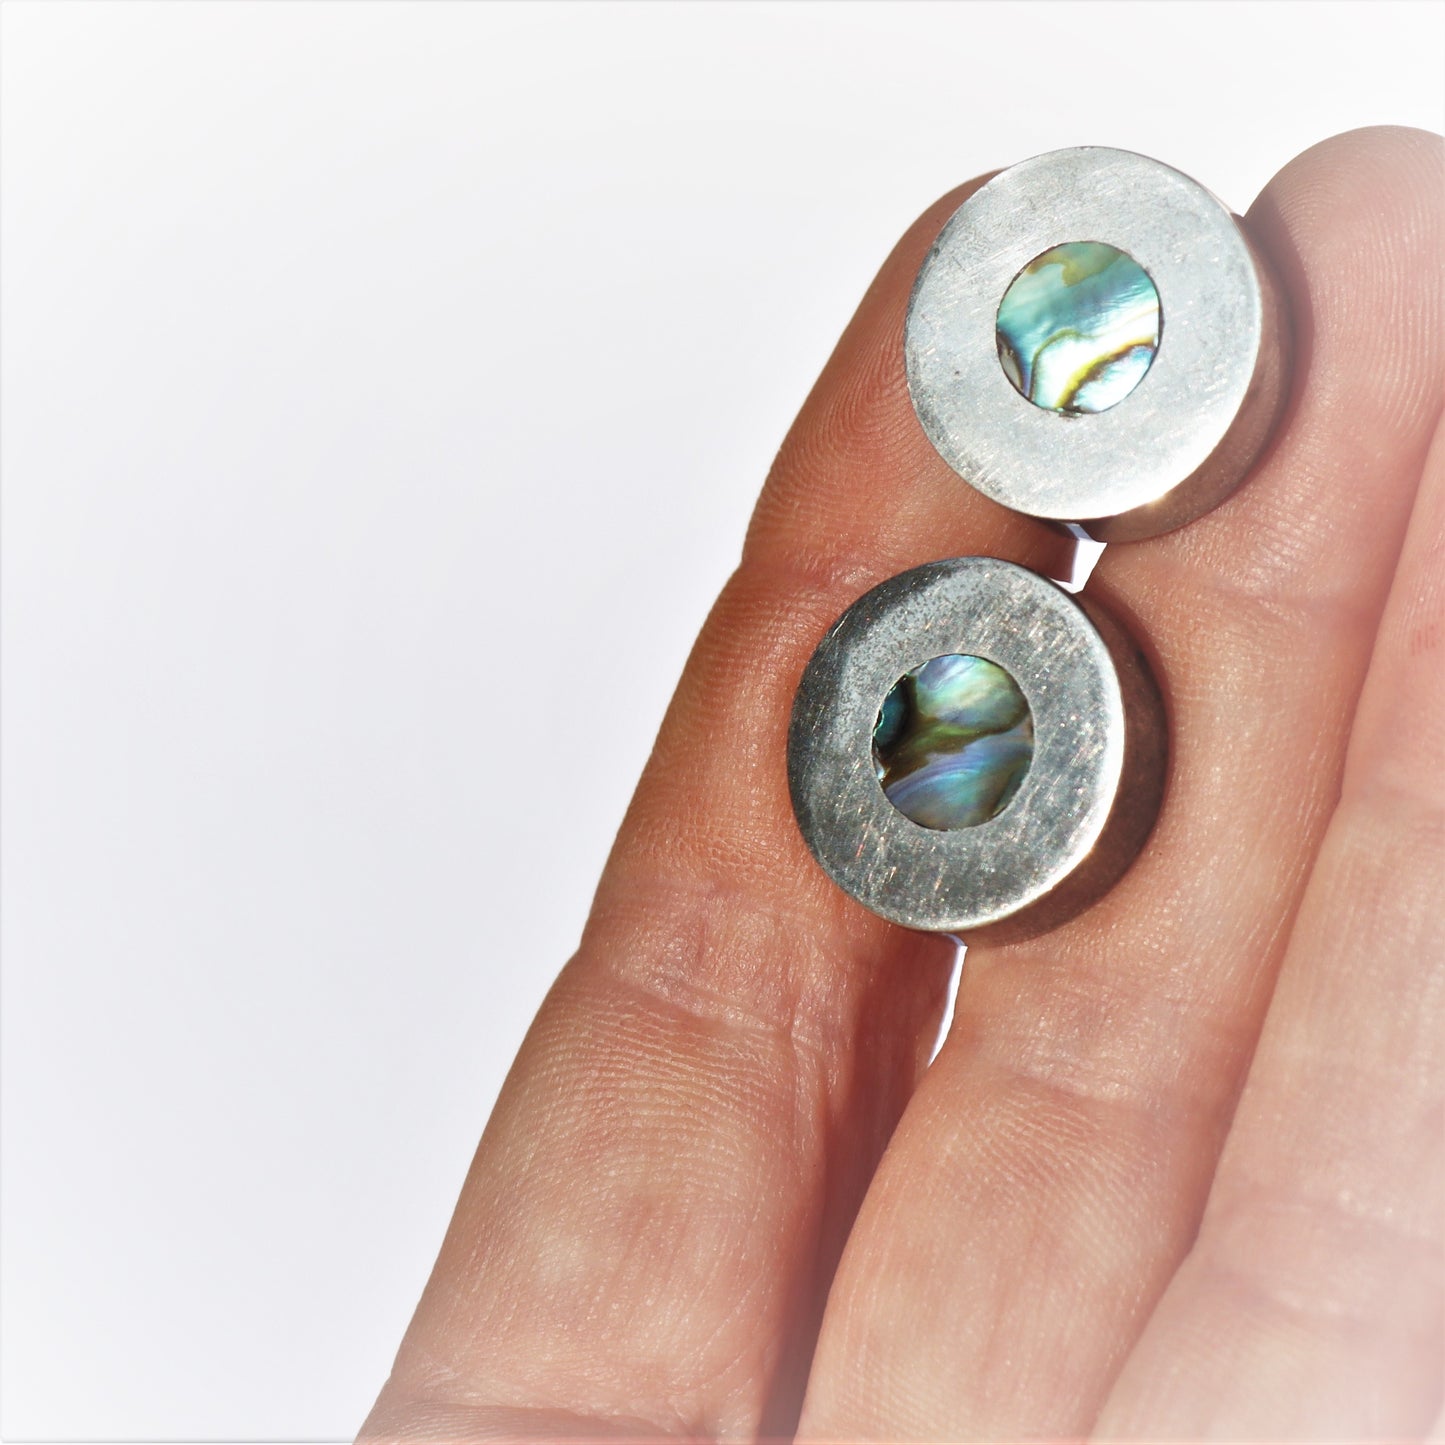 Mid Century Modern Sterling Silver Taxco Abalone Inlay Cufflinks c1970 Signed